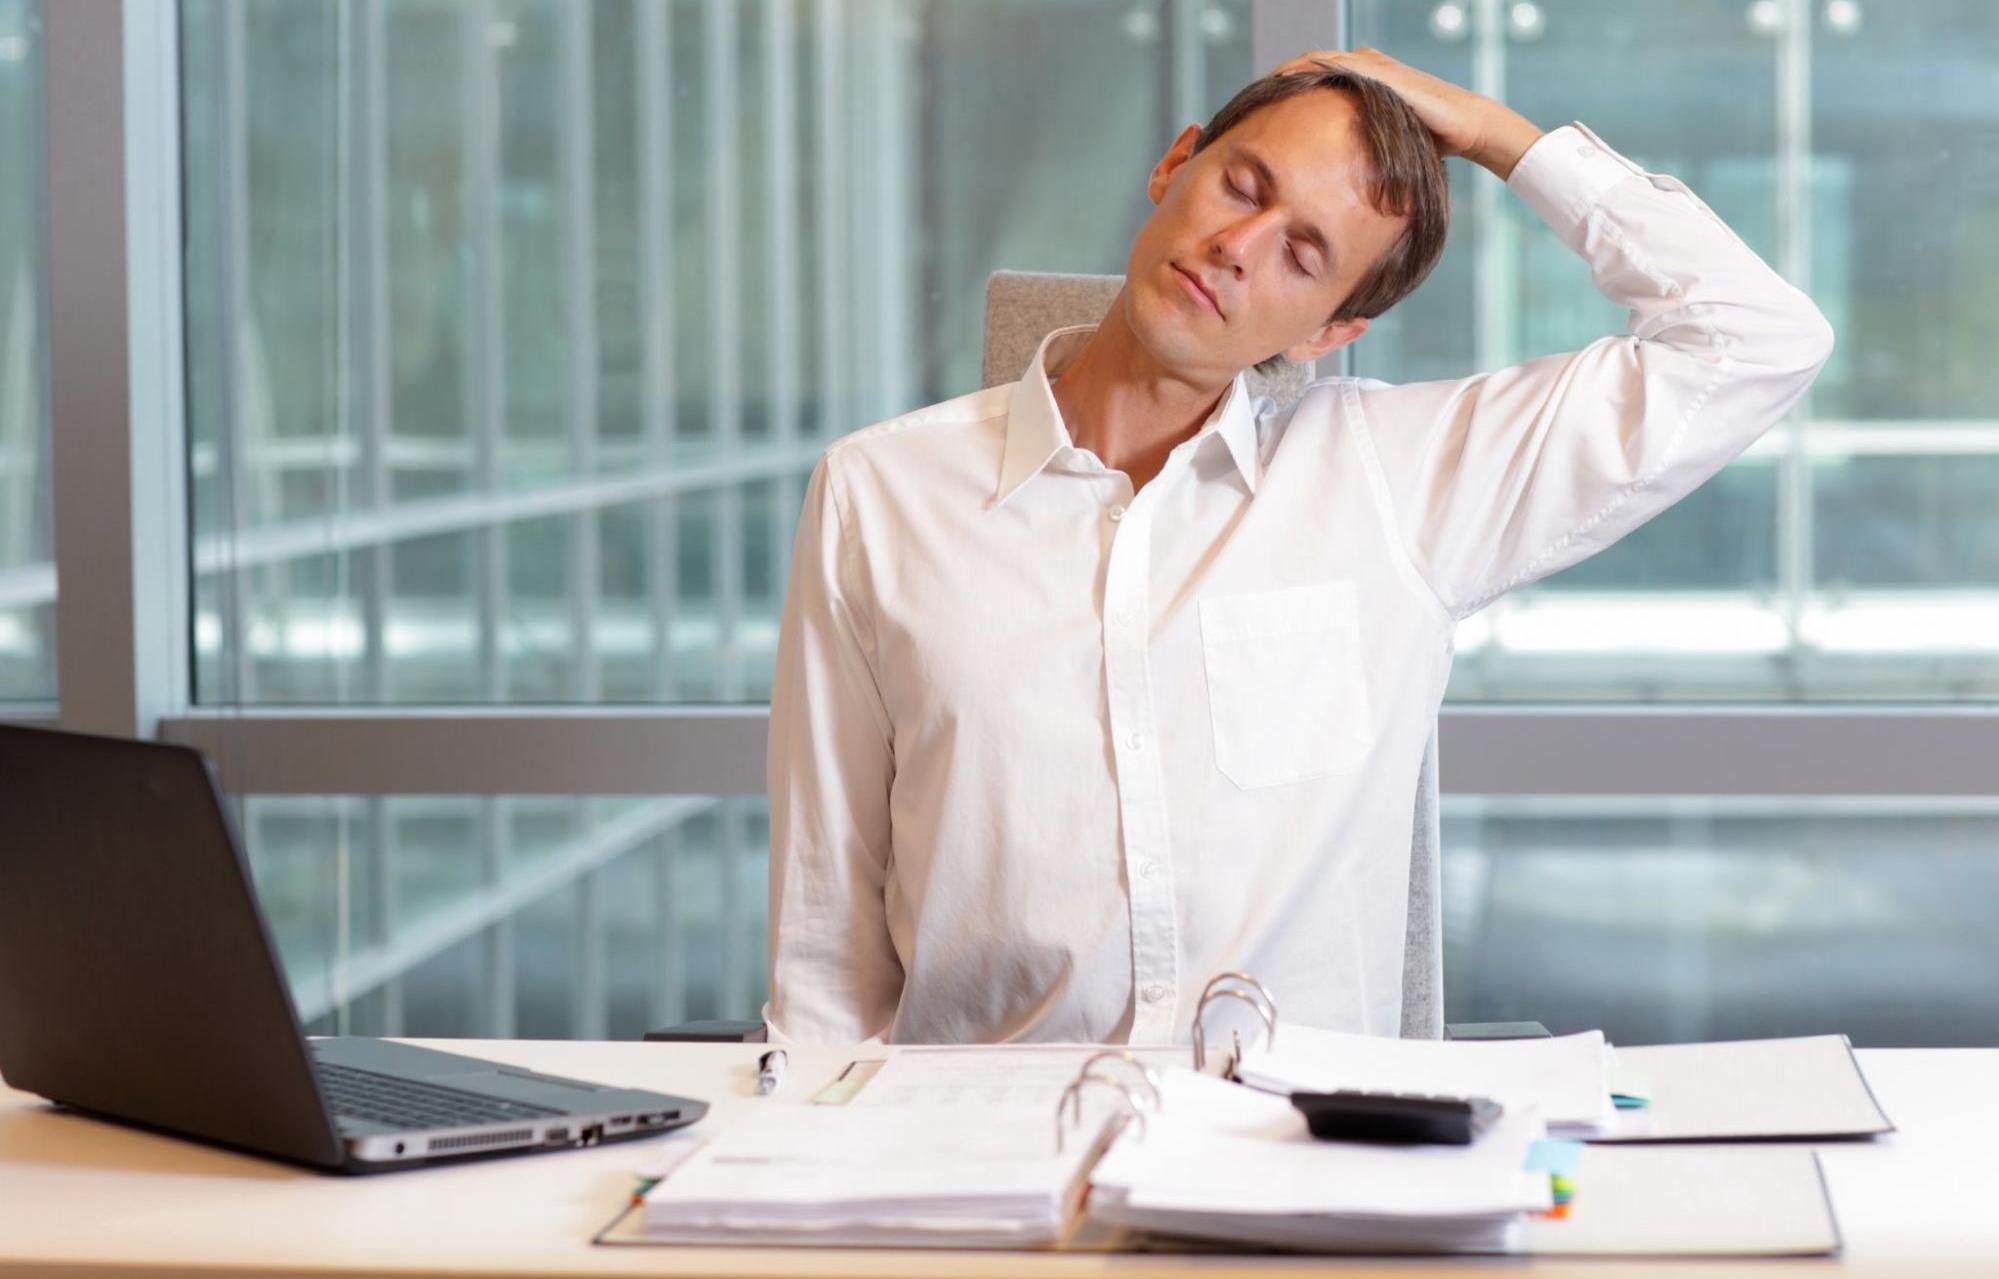 A man is stretching his neck at his desk in his office